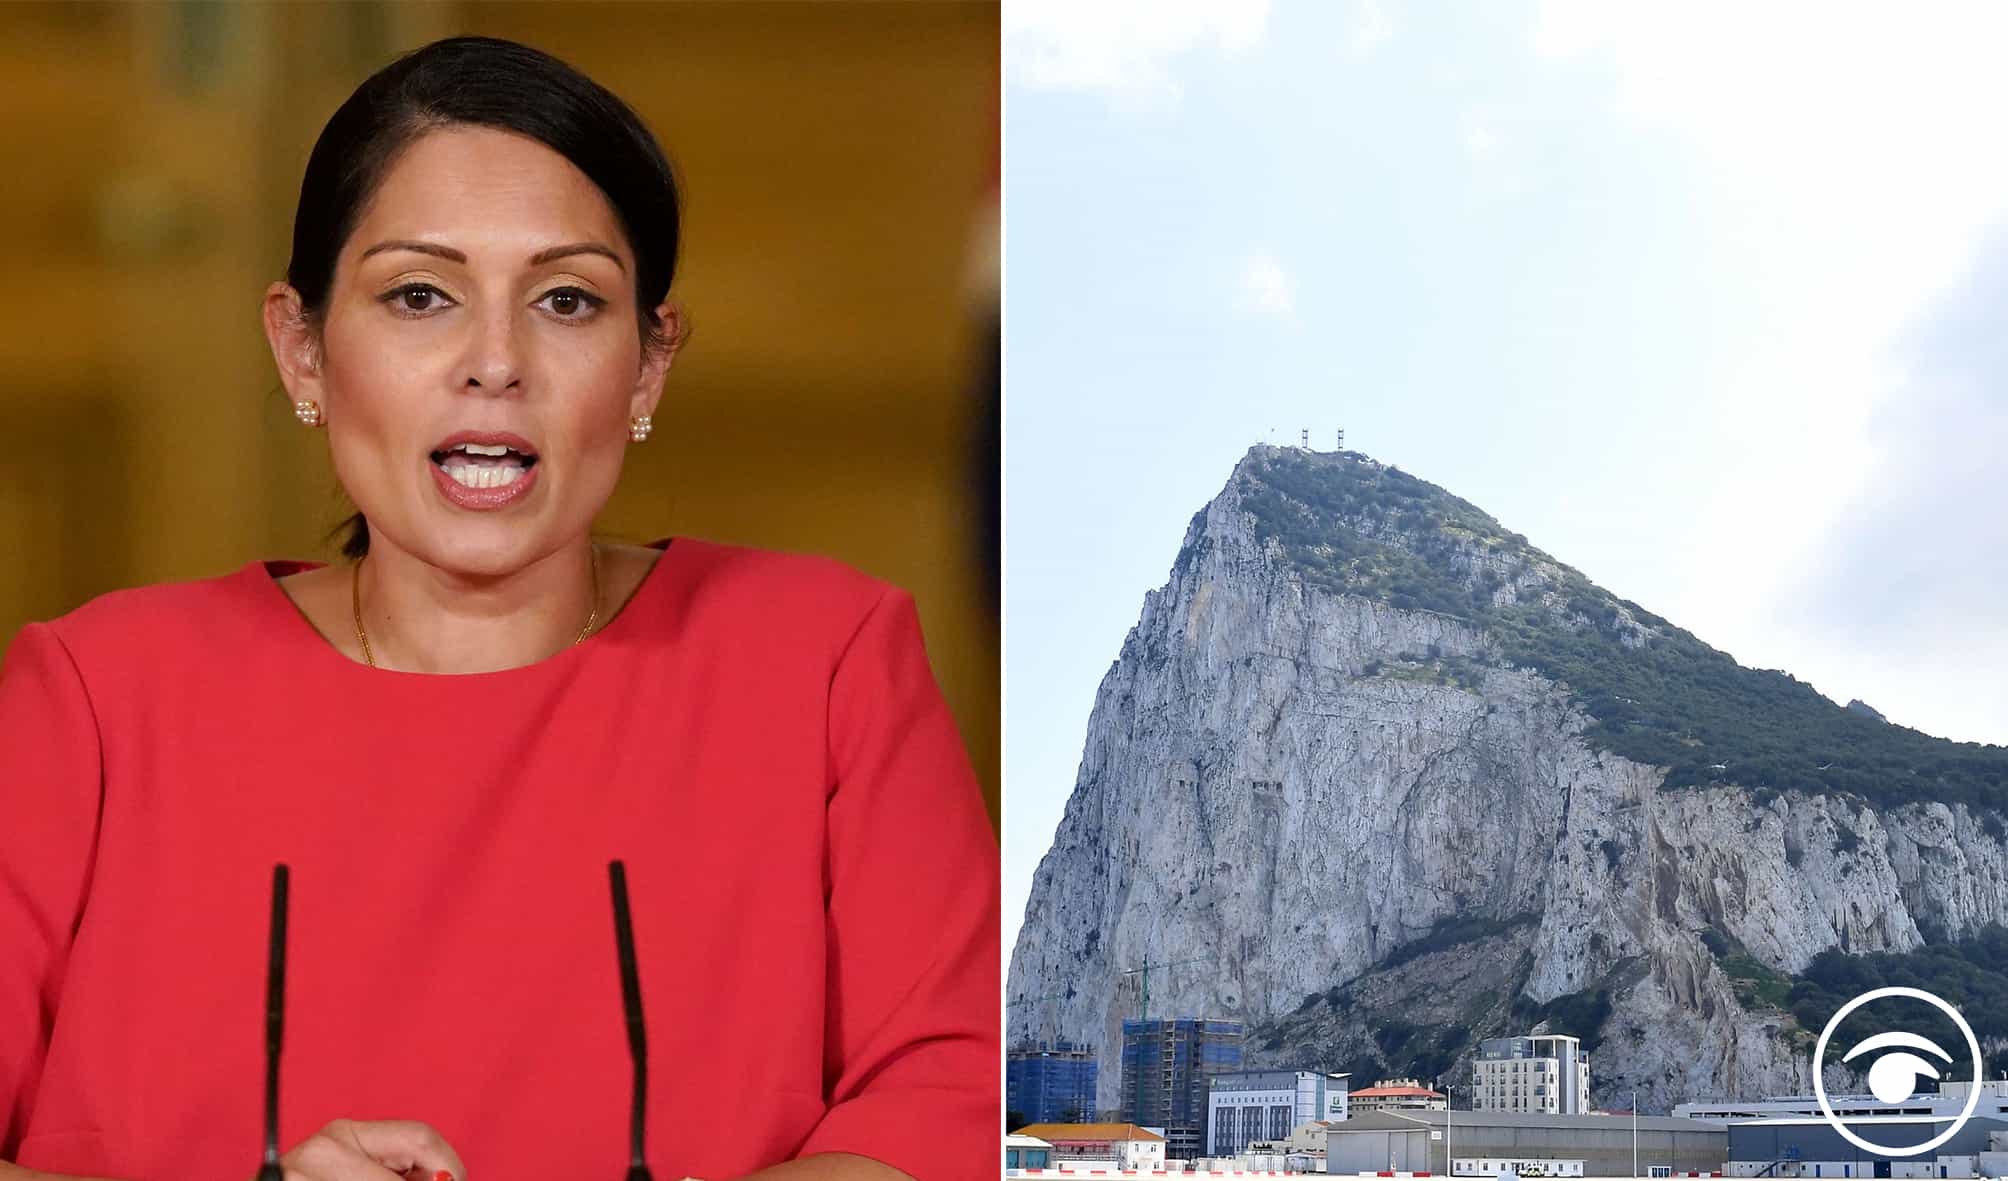 Isle of Man and Gibraltar distance themselves from ‘vile’ Tory plans to hold UK asylum seekers